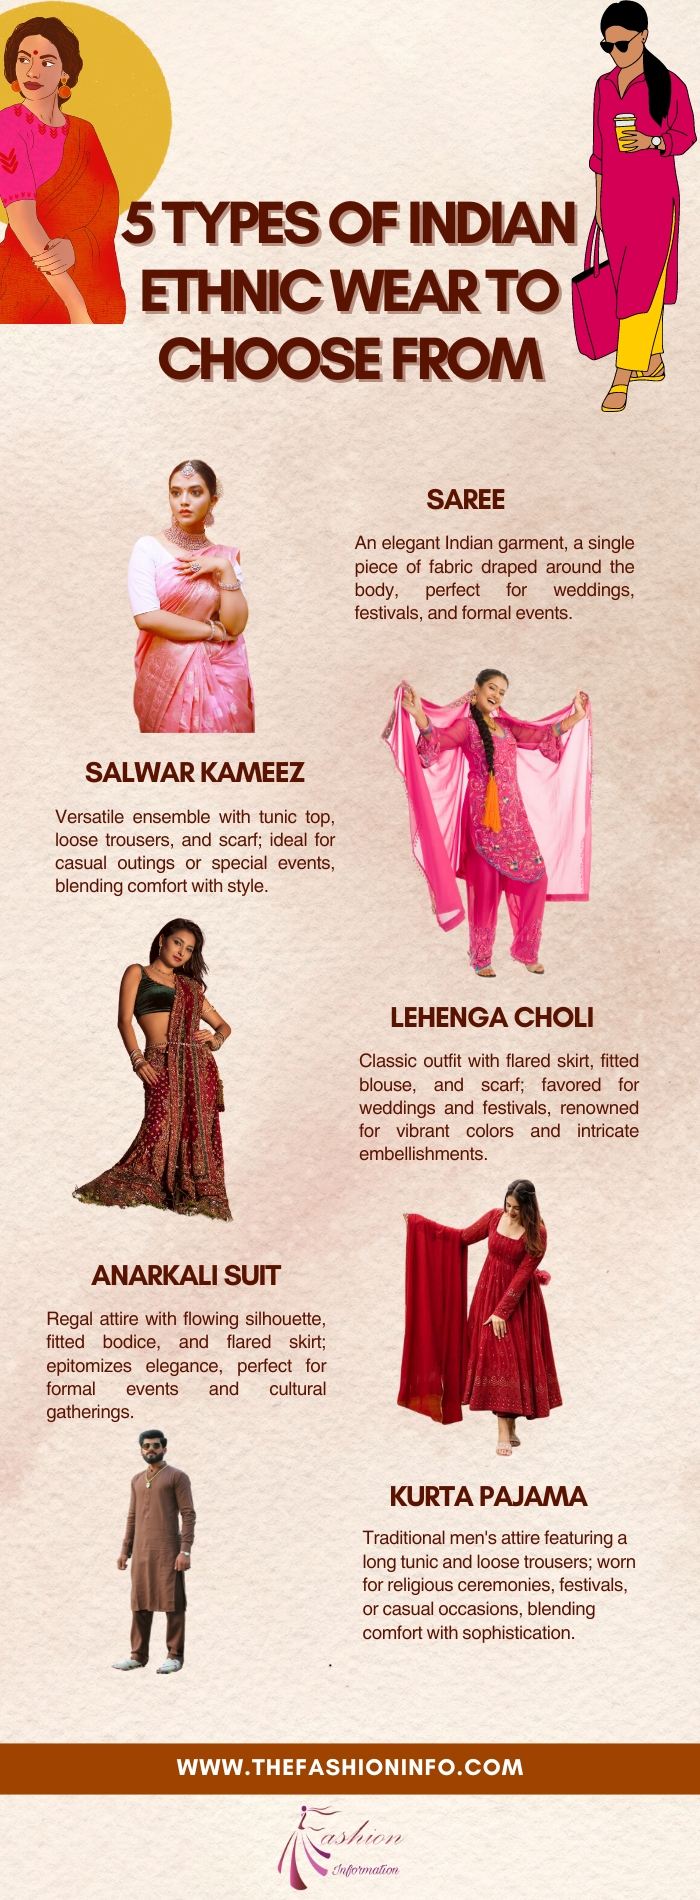 5 Types of Indian Ethnic Wear to Choose From